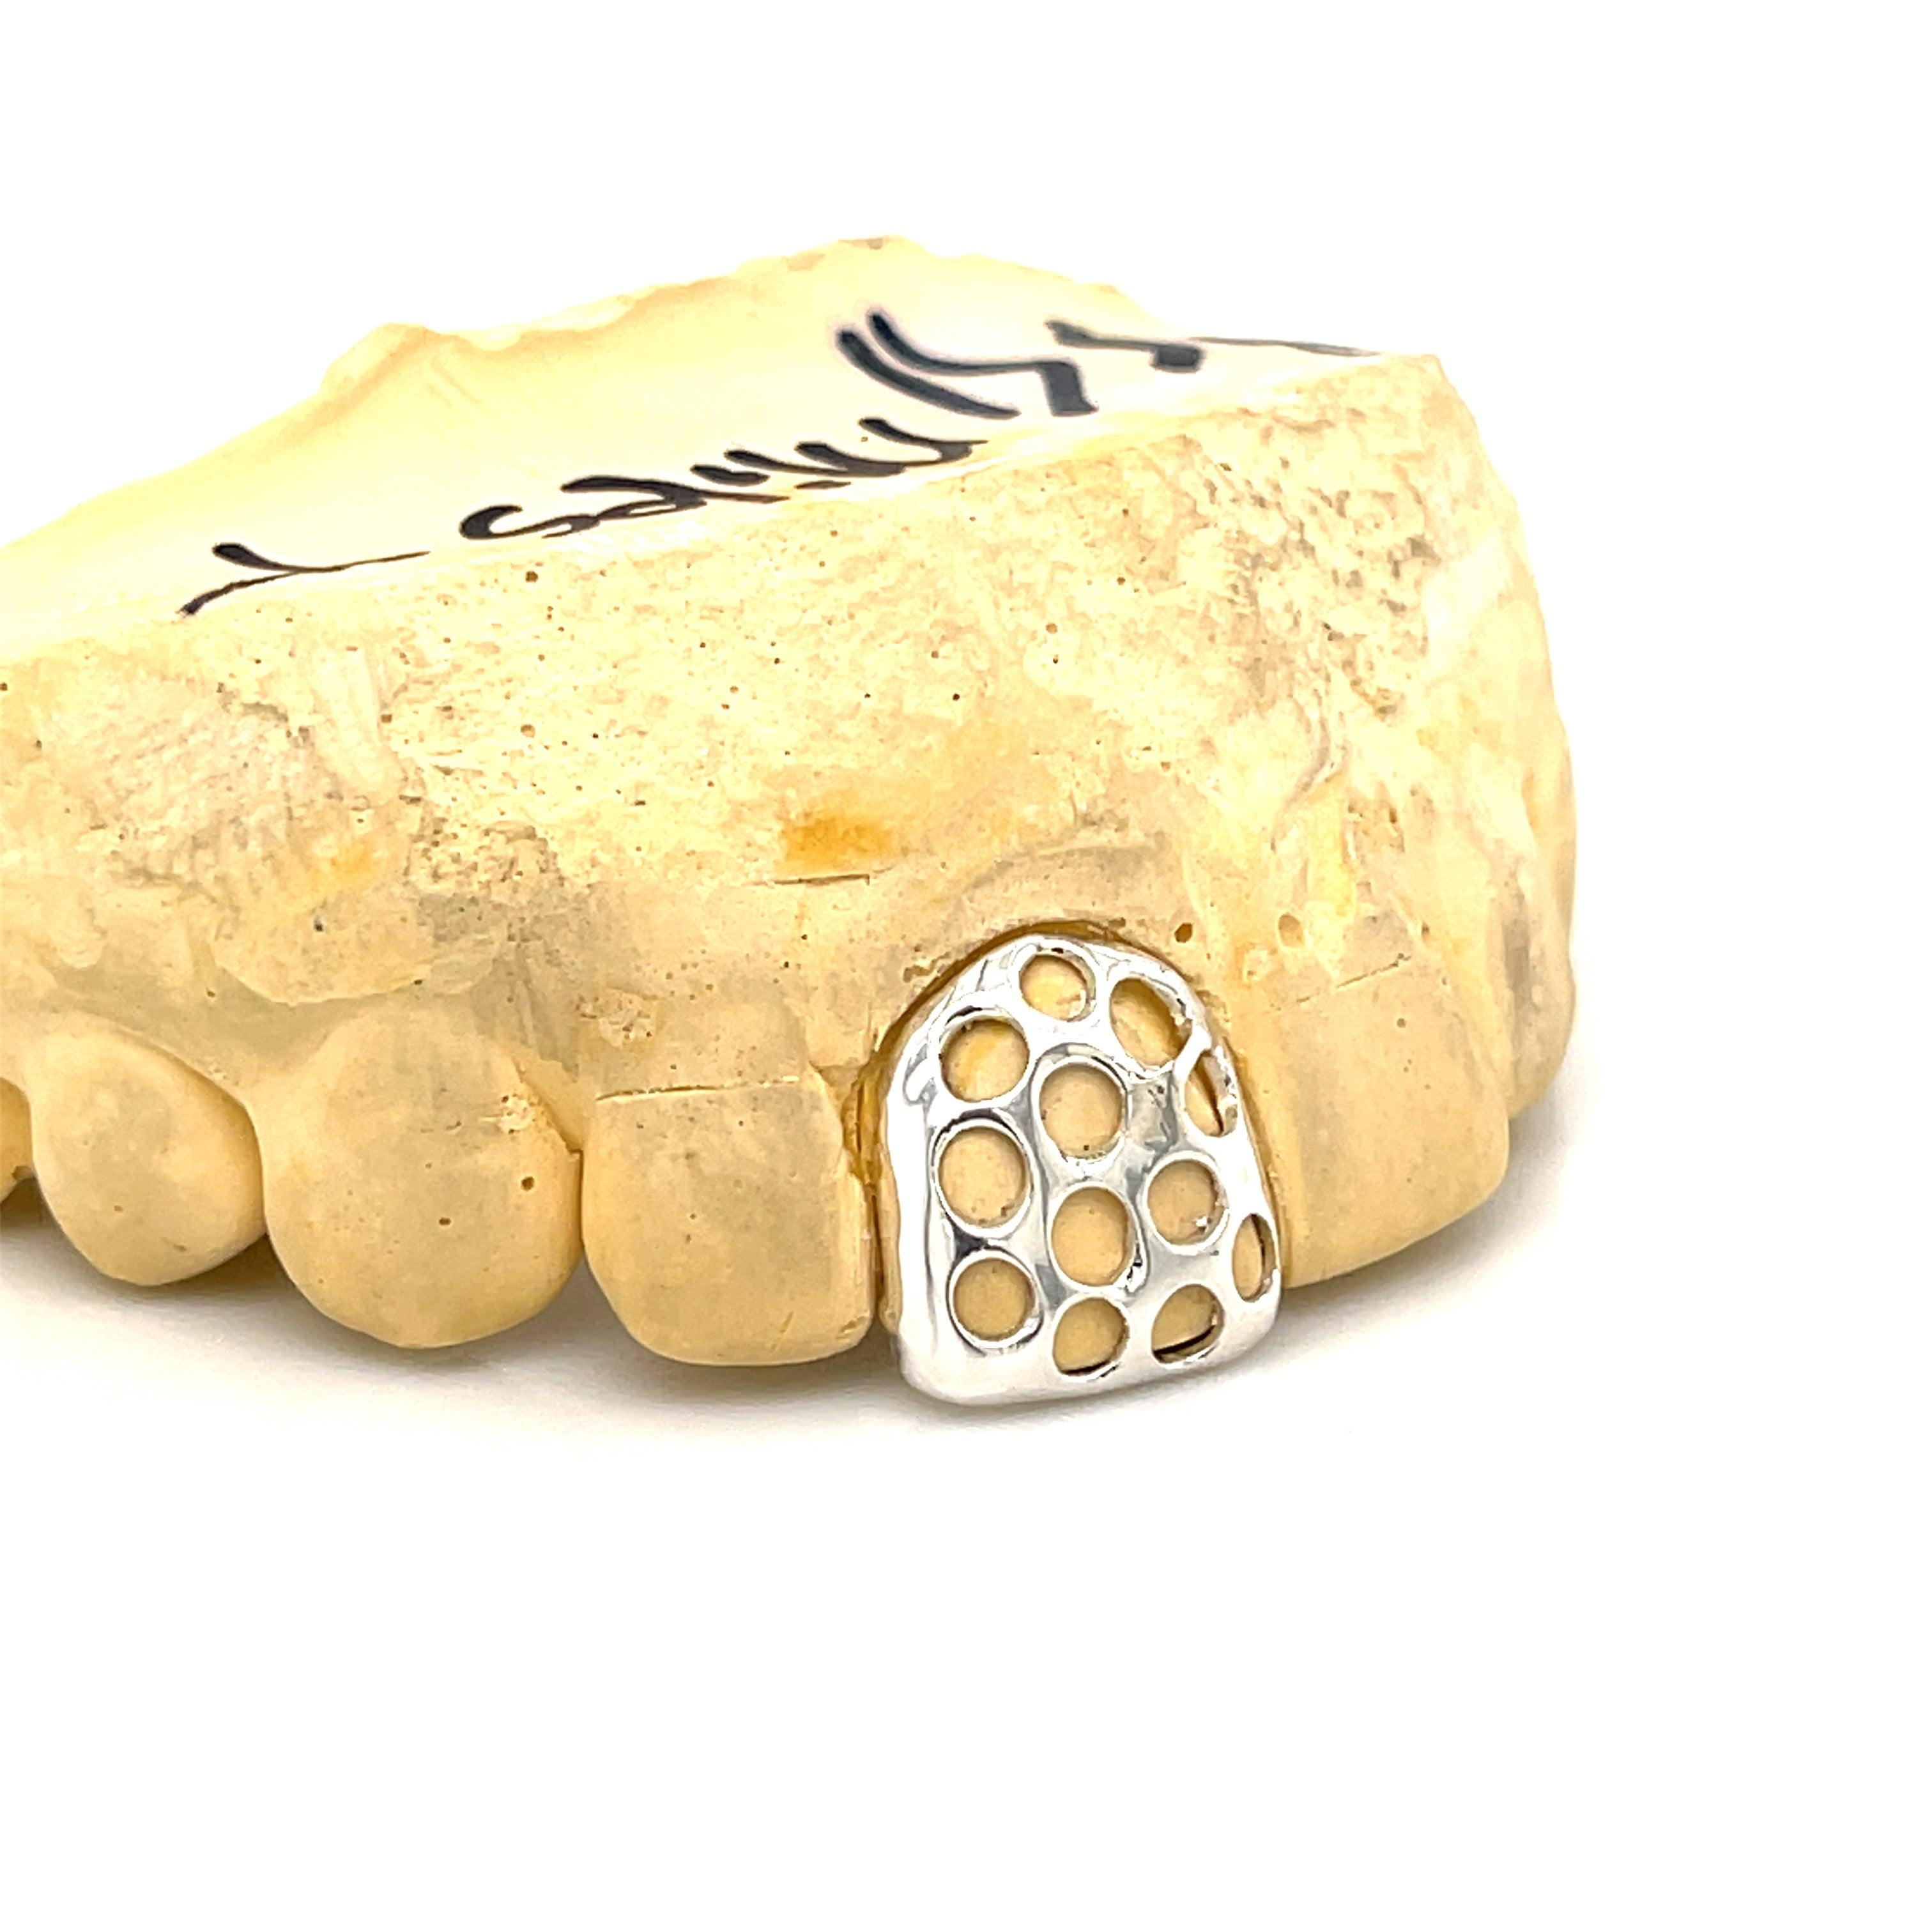 1pc Silver Cheese Grater Grillz - Seattle Gold Grillz